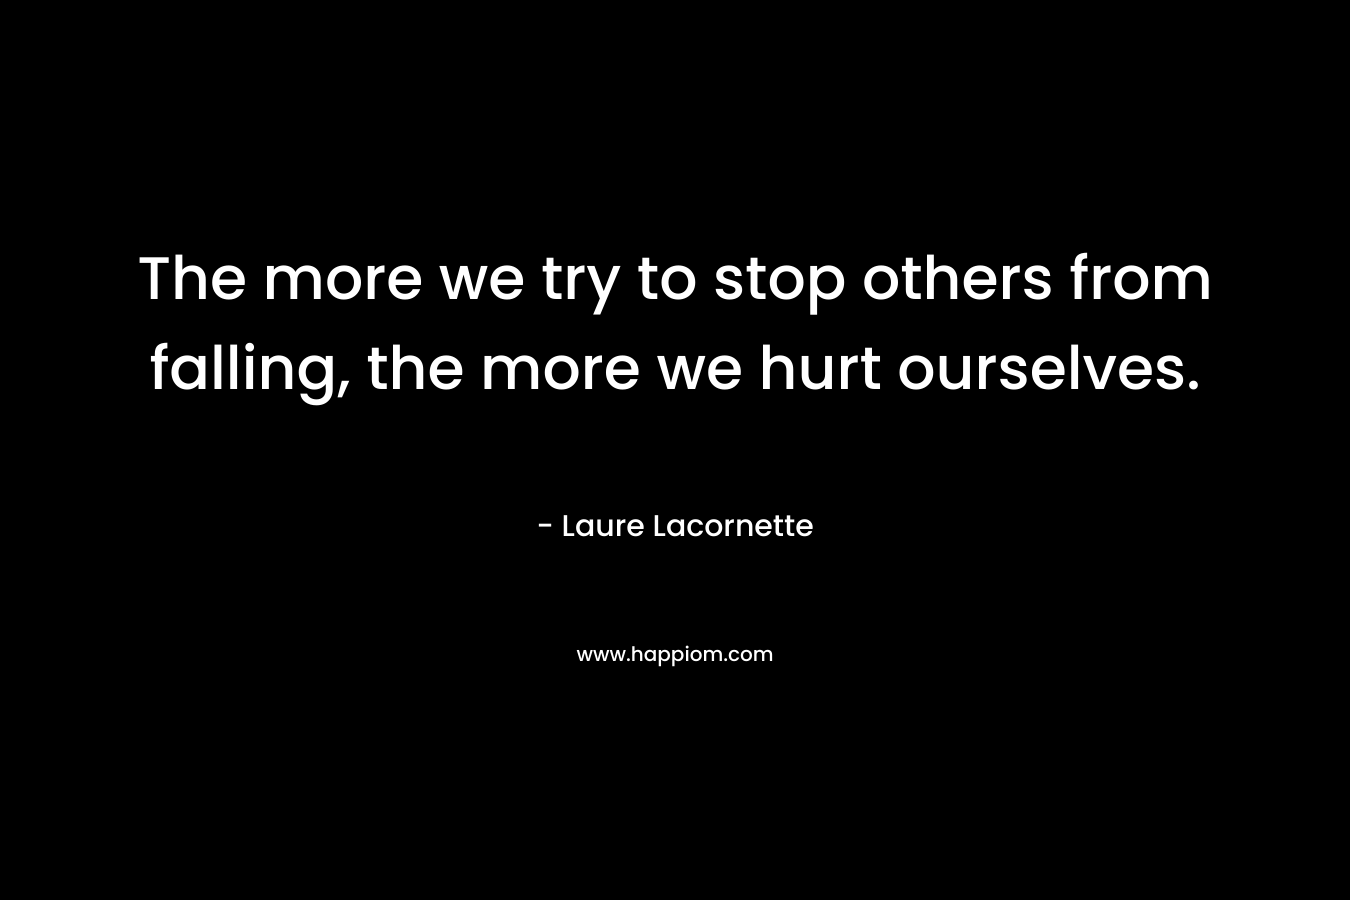 The more we try to stop others from falling, the more we hurt ourselves. – Laure Lacornette